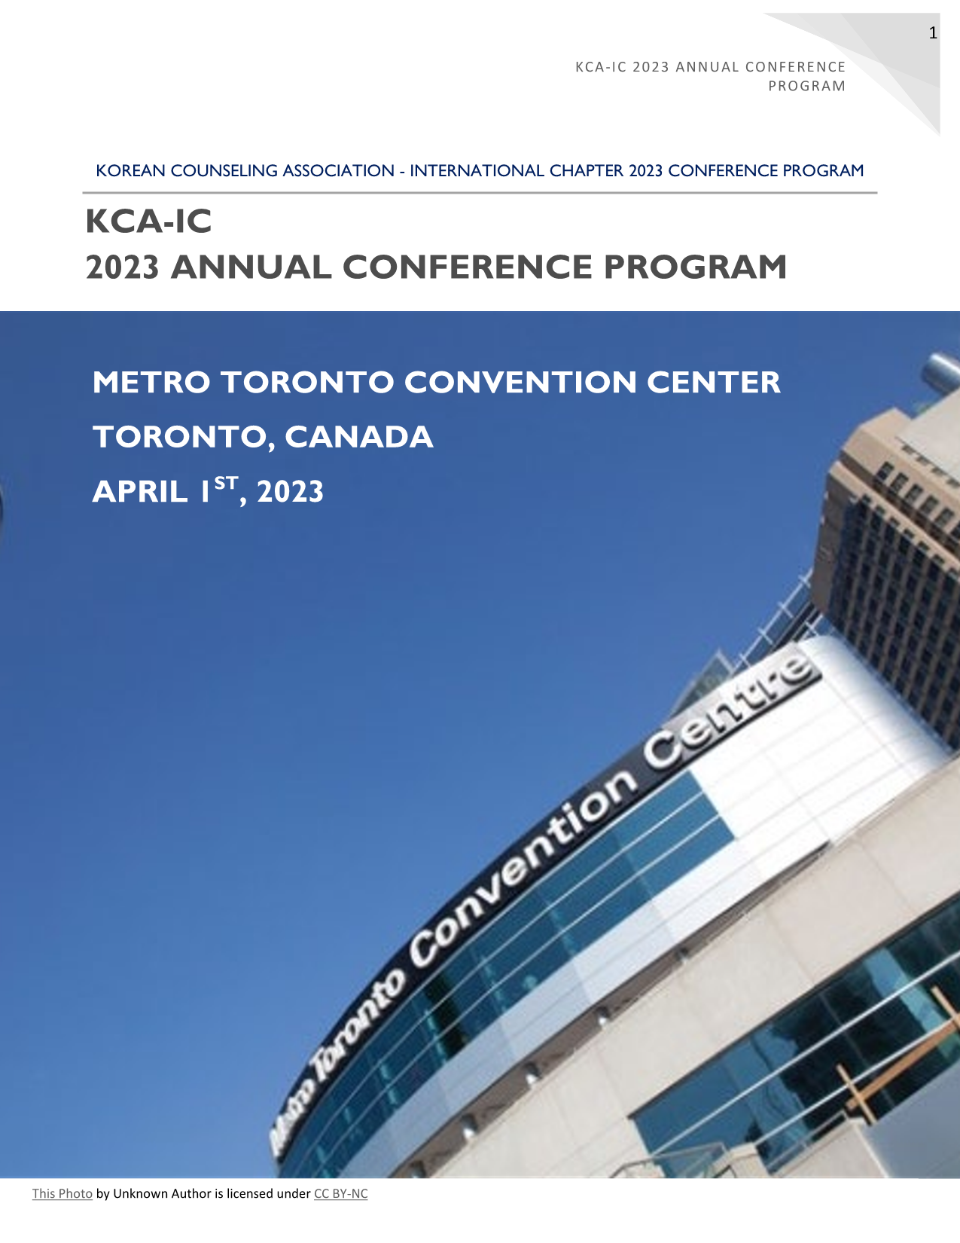 KCA-IC 2023 Annual Conference PROGRAM Book_1.png